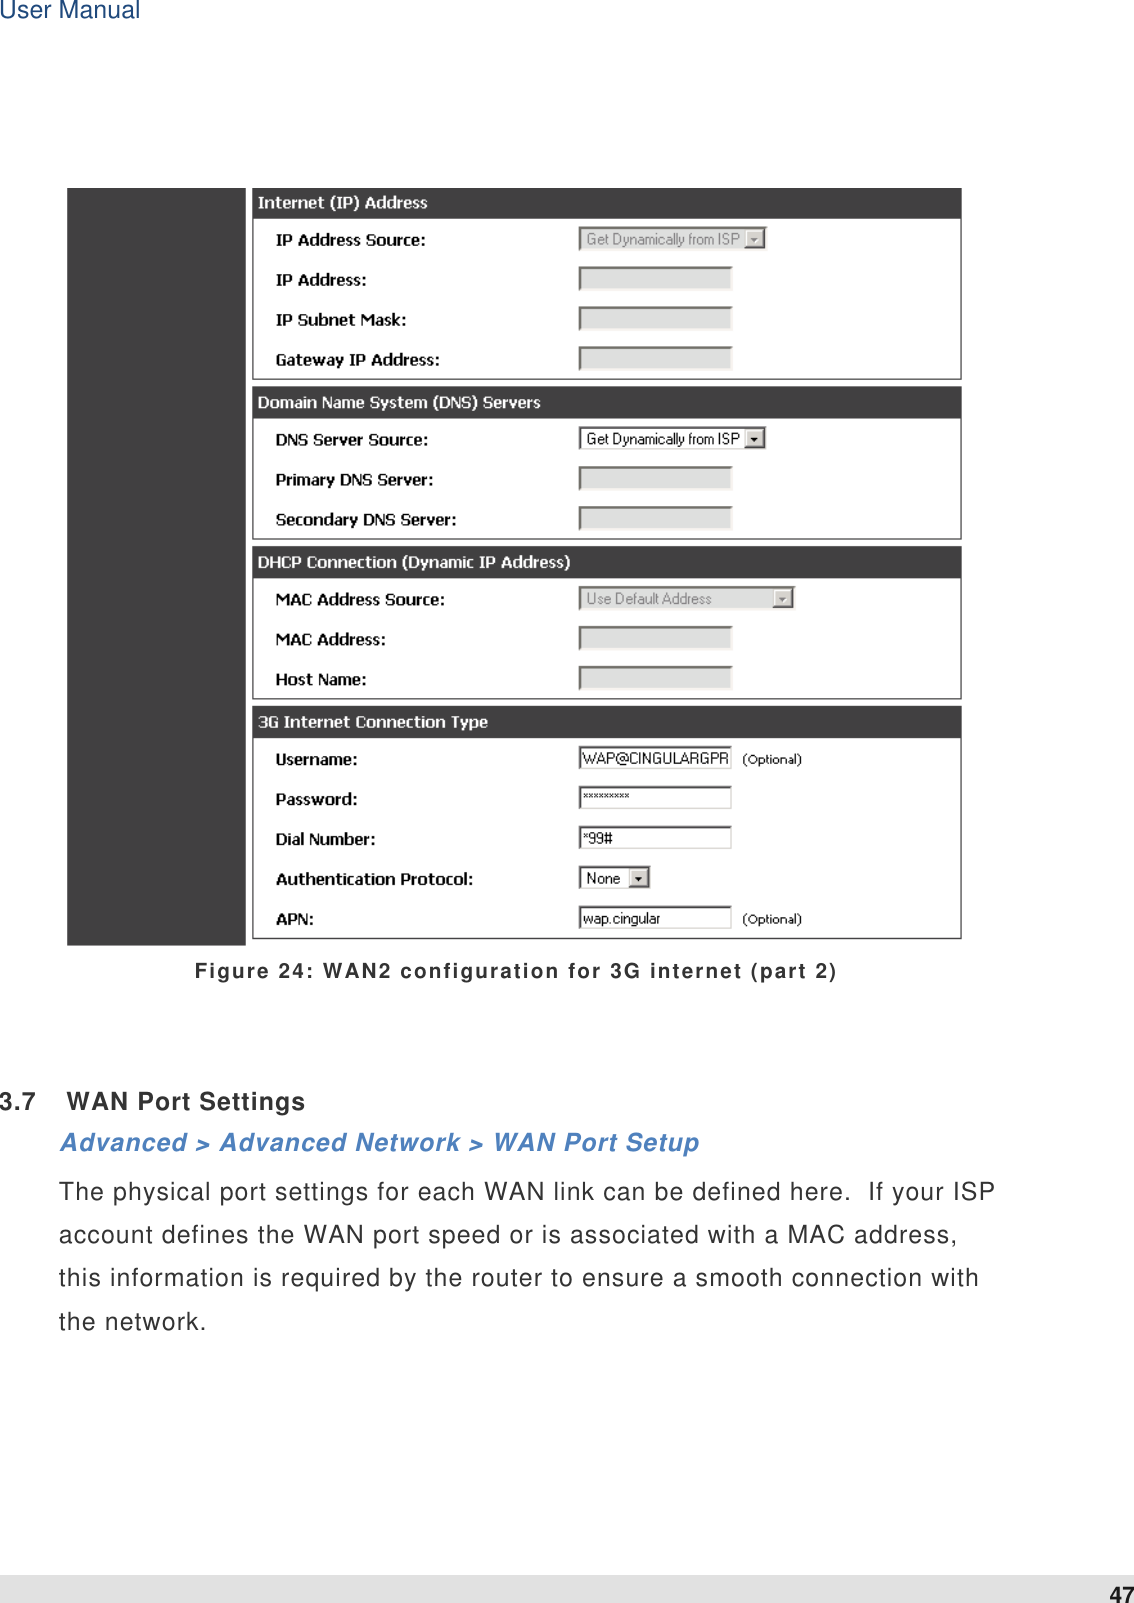 User Manual 47     Figure 24: WAN2 configuration for 3G internet (part 2)  3.7  WAN Port Settings Advanced &gt; Advanced Network &gt; WAN Port Setup The physical port settings for each WAN link can be defined here.  If your ISP account defines the WAN port speed or is associated with a MAC address, this information is required by the router to ensure a smooth connection with the network.     